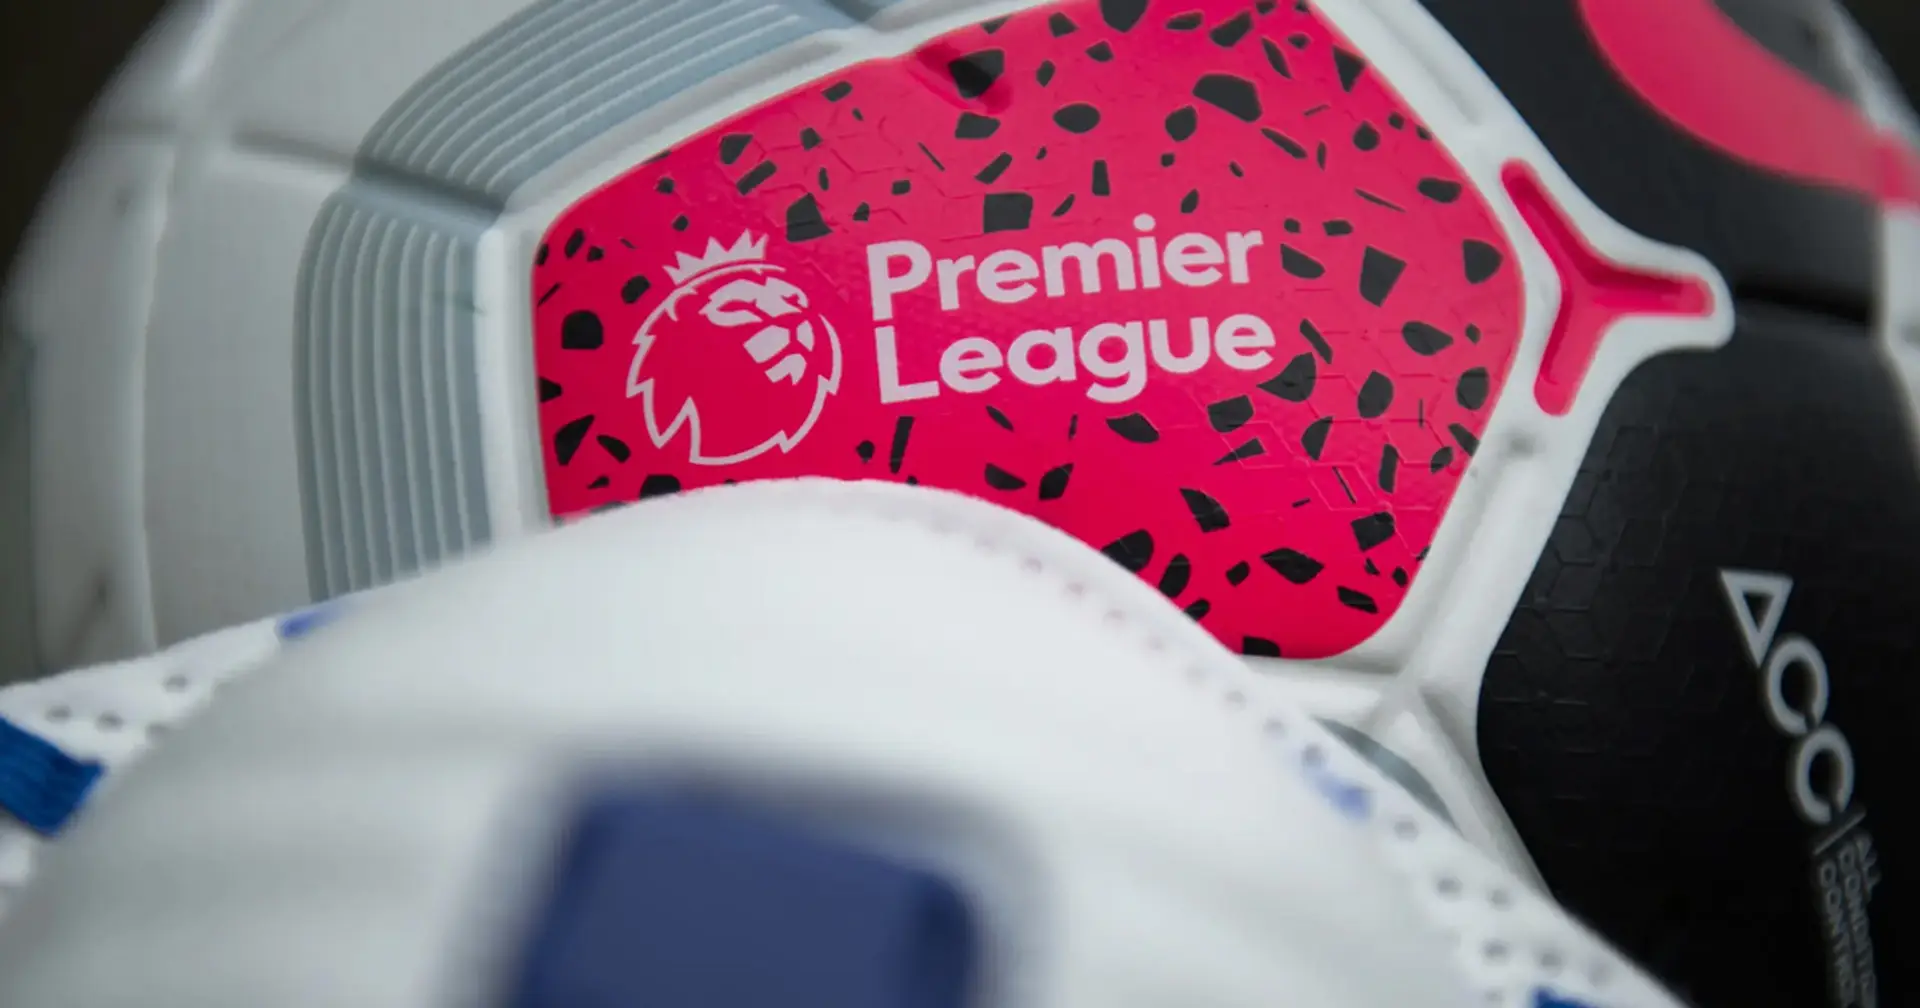 ESPN: Premier League players do not want to play during coronavirus pandemic 